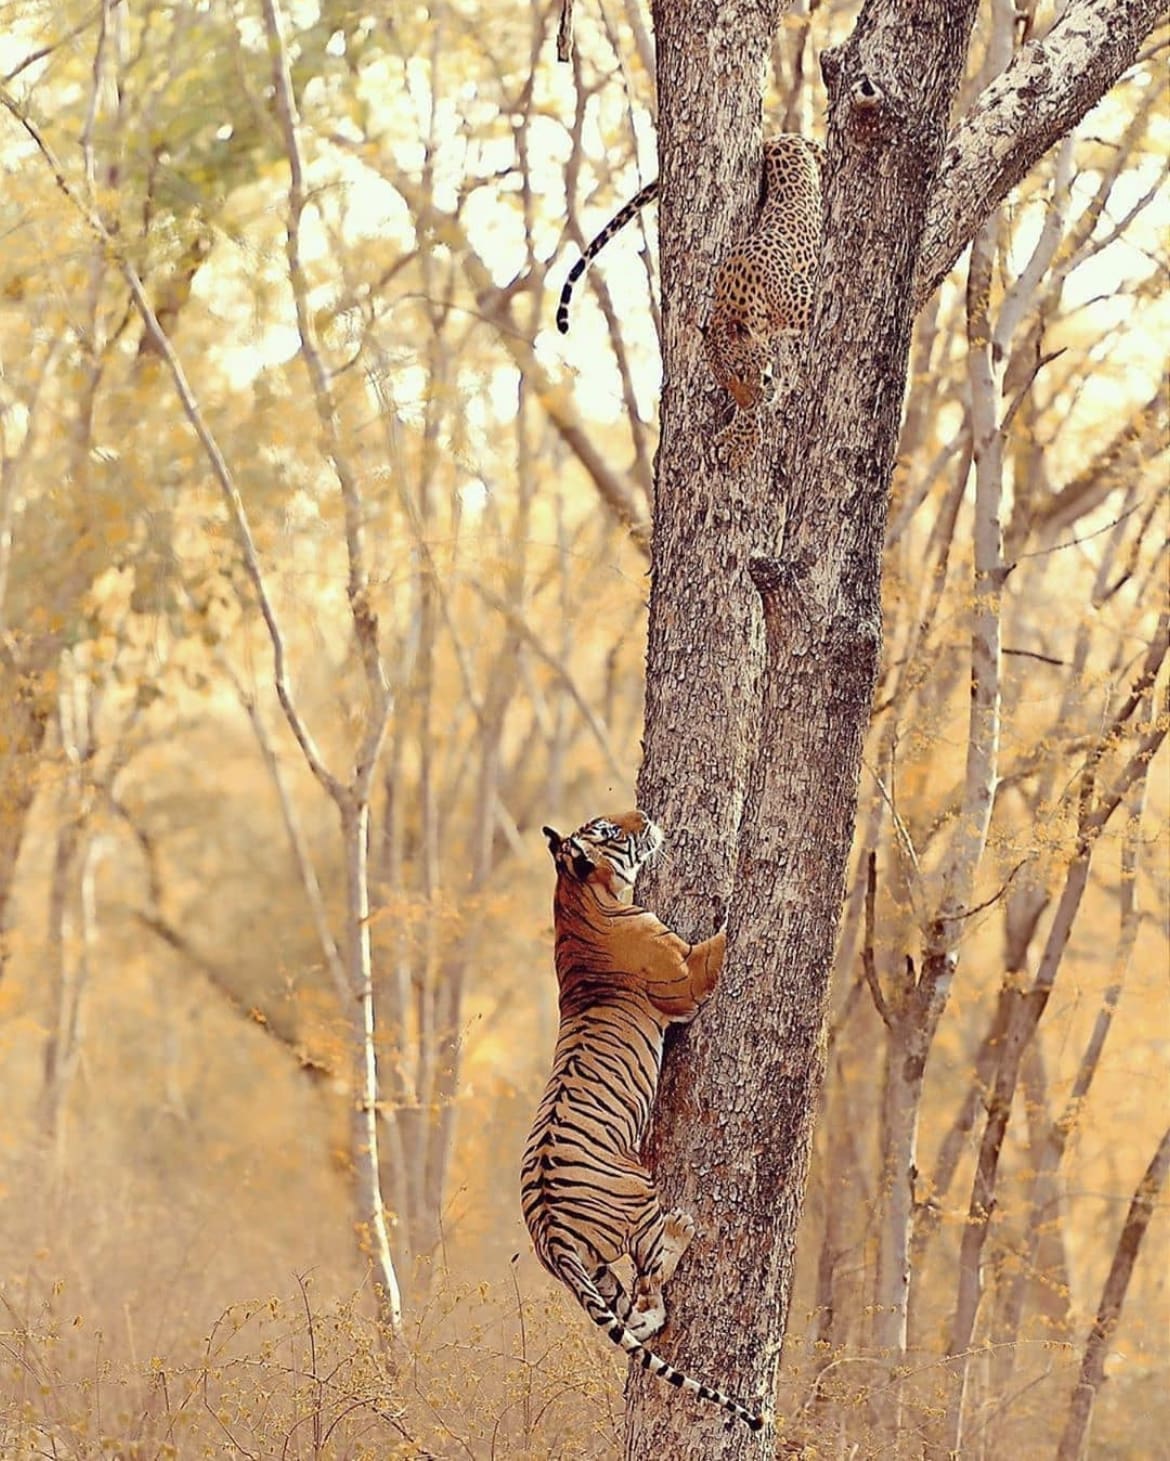 Tiger chases a leopard up a tree